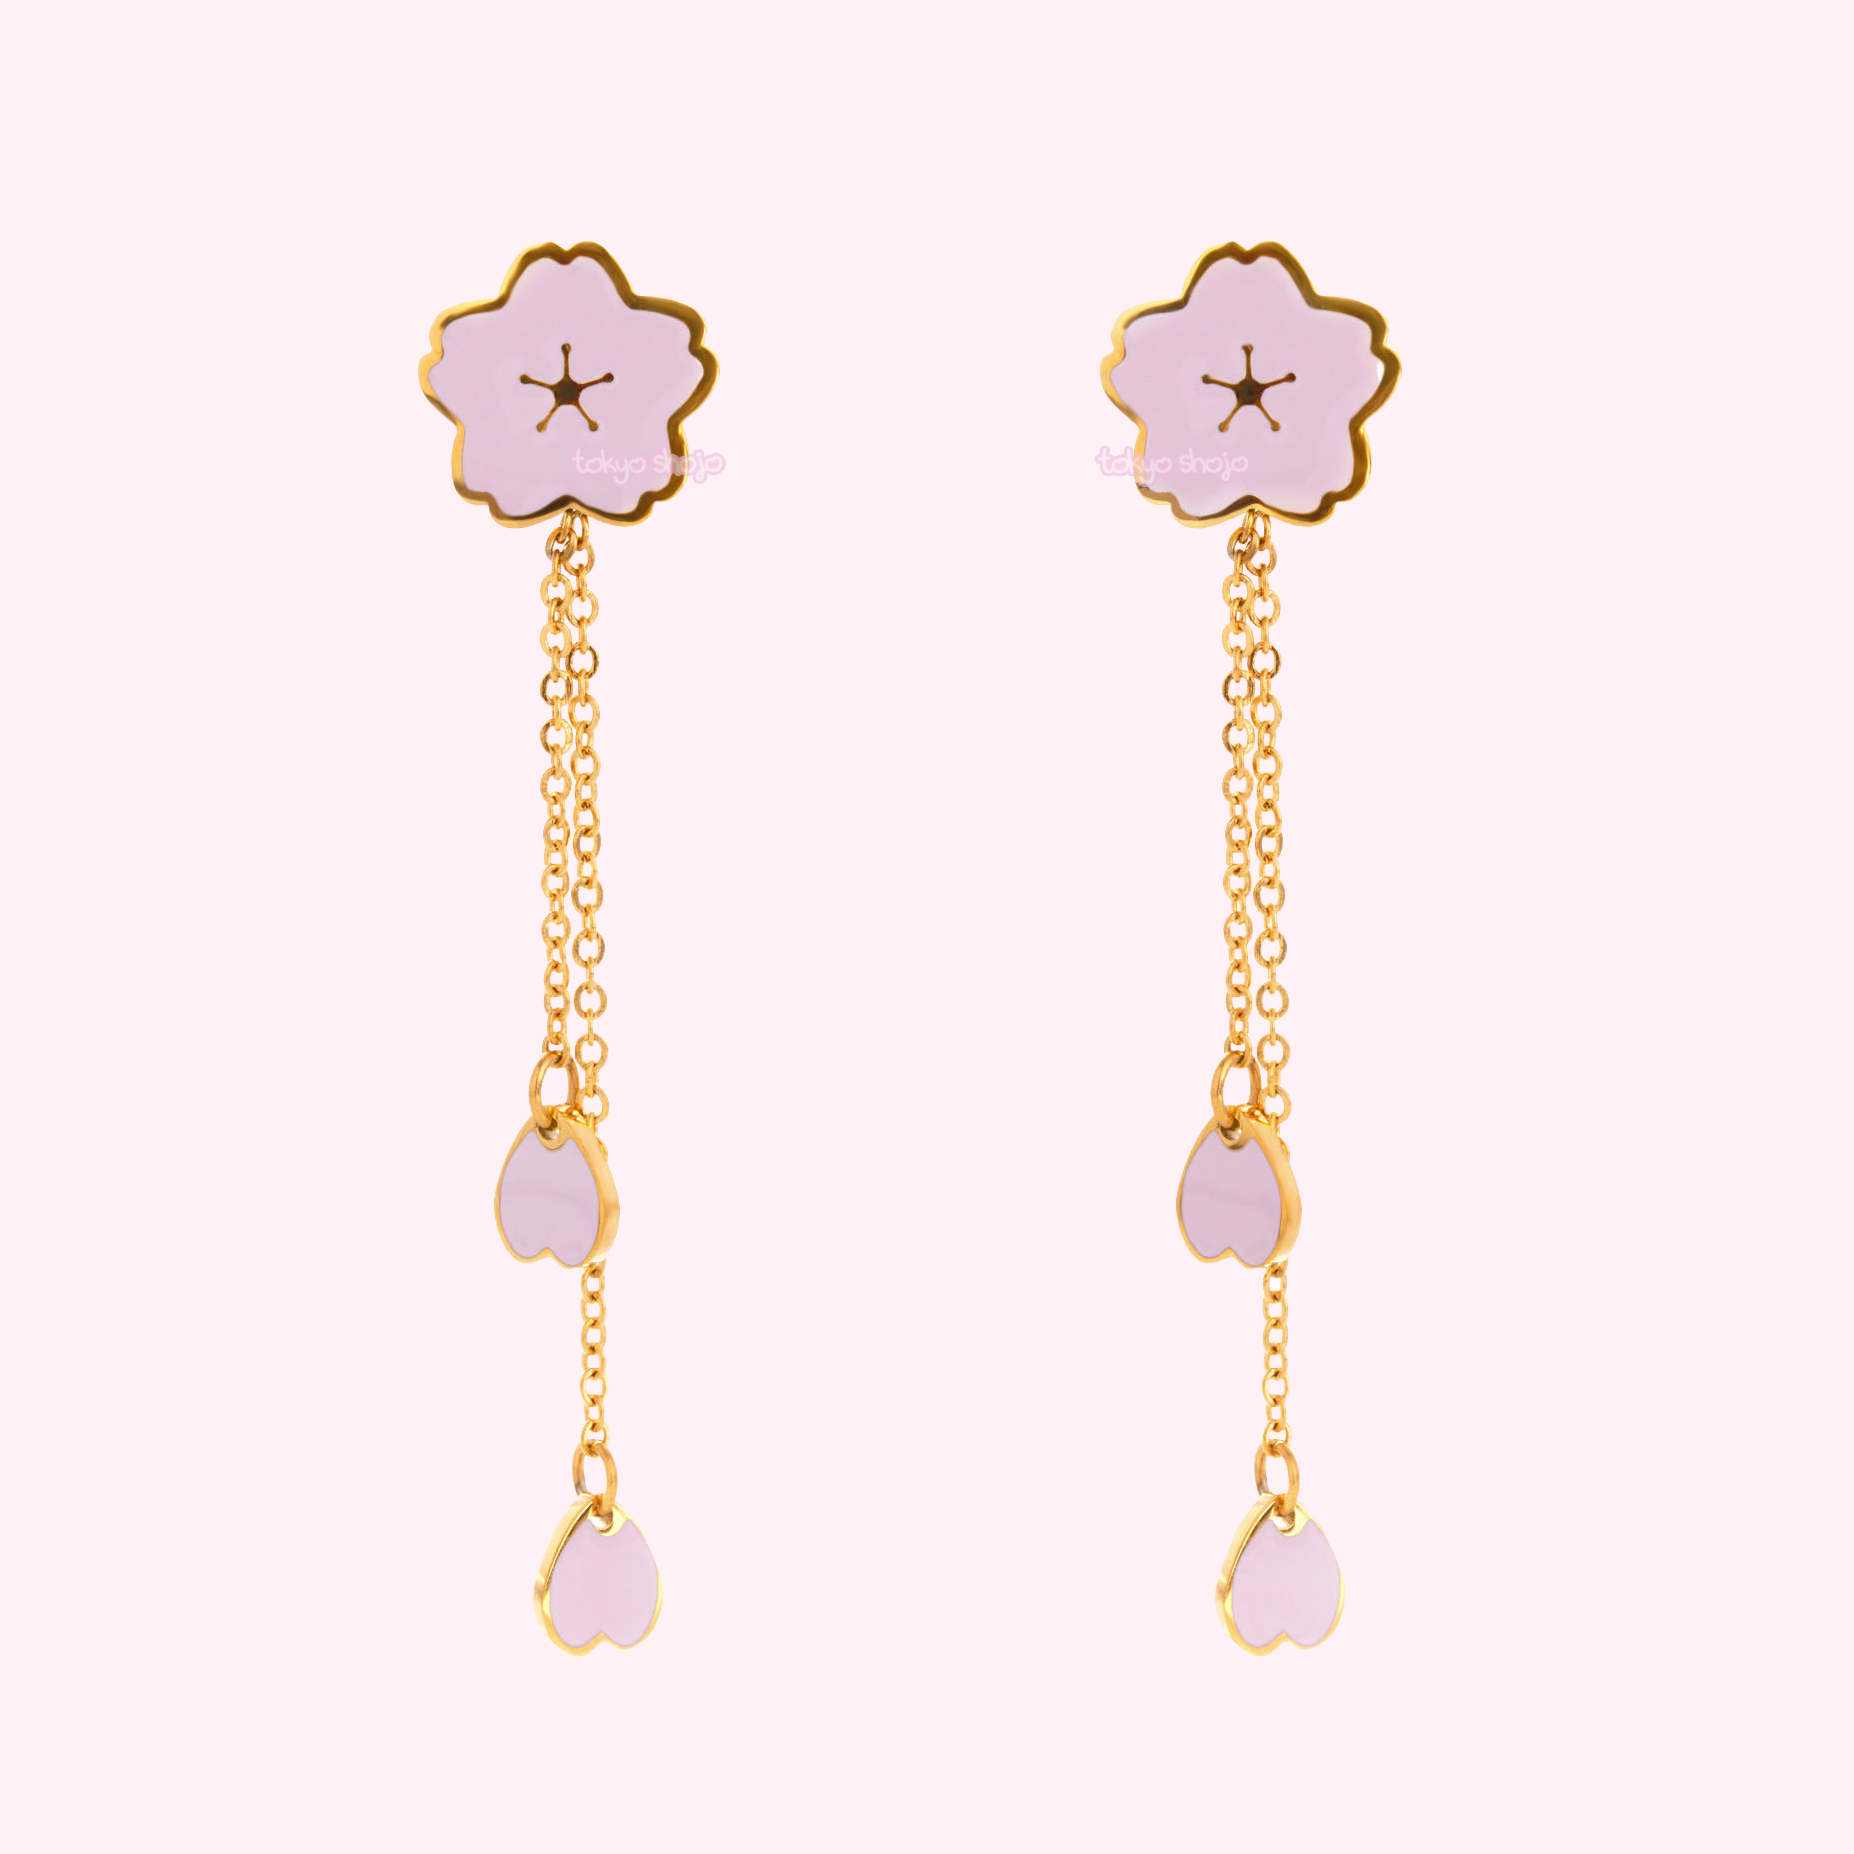 earrings-pinkbg-Recovered.png